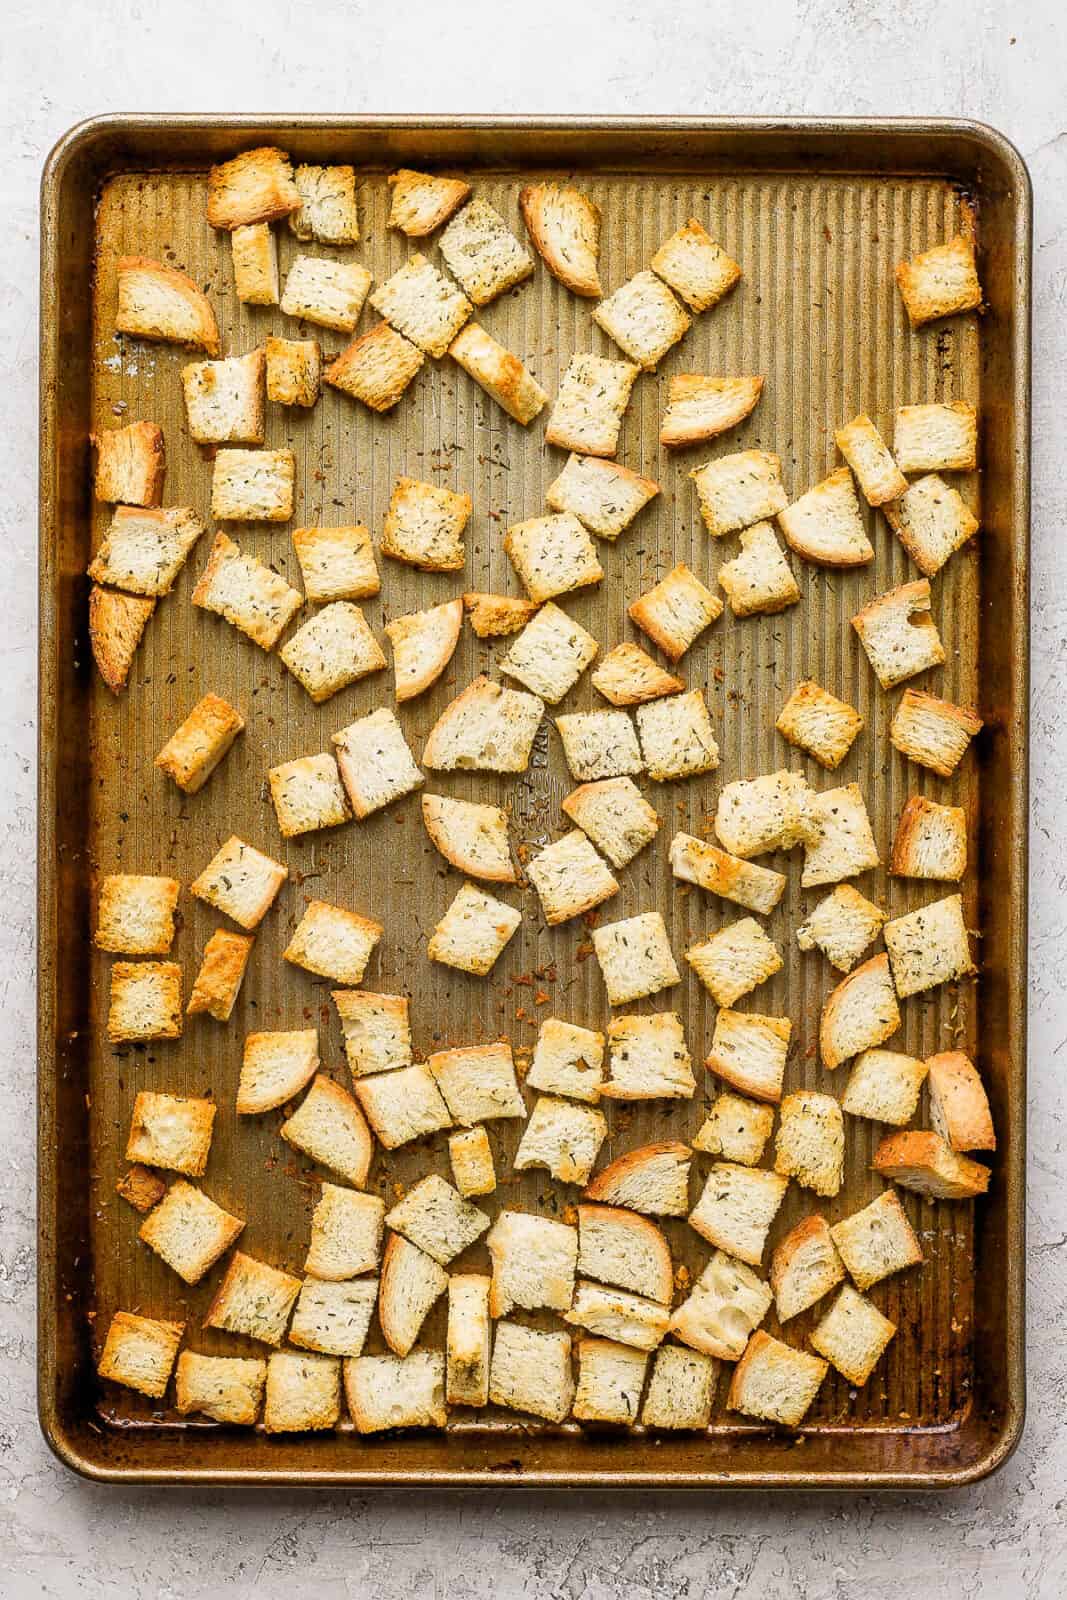 Baked croutons on a baking sheet after baking.